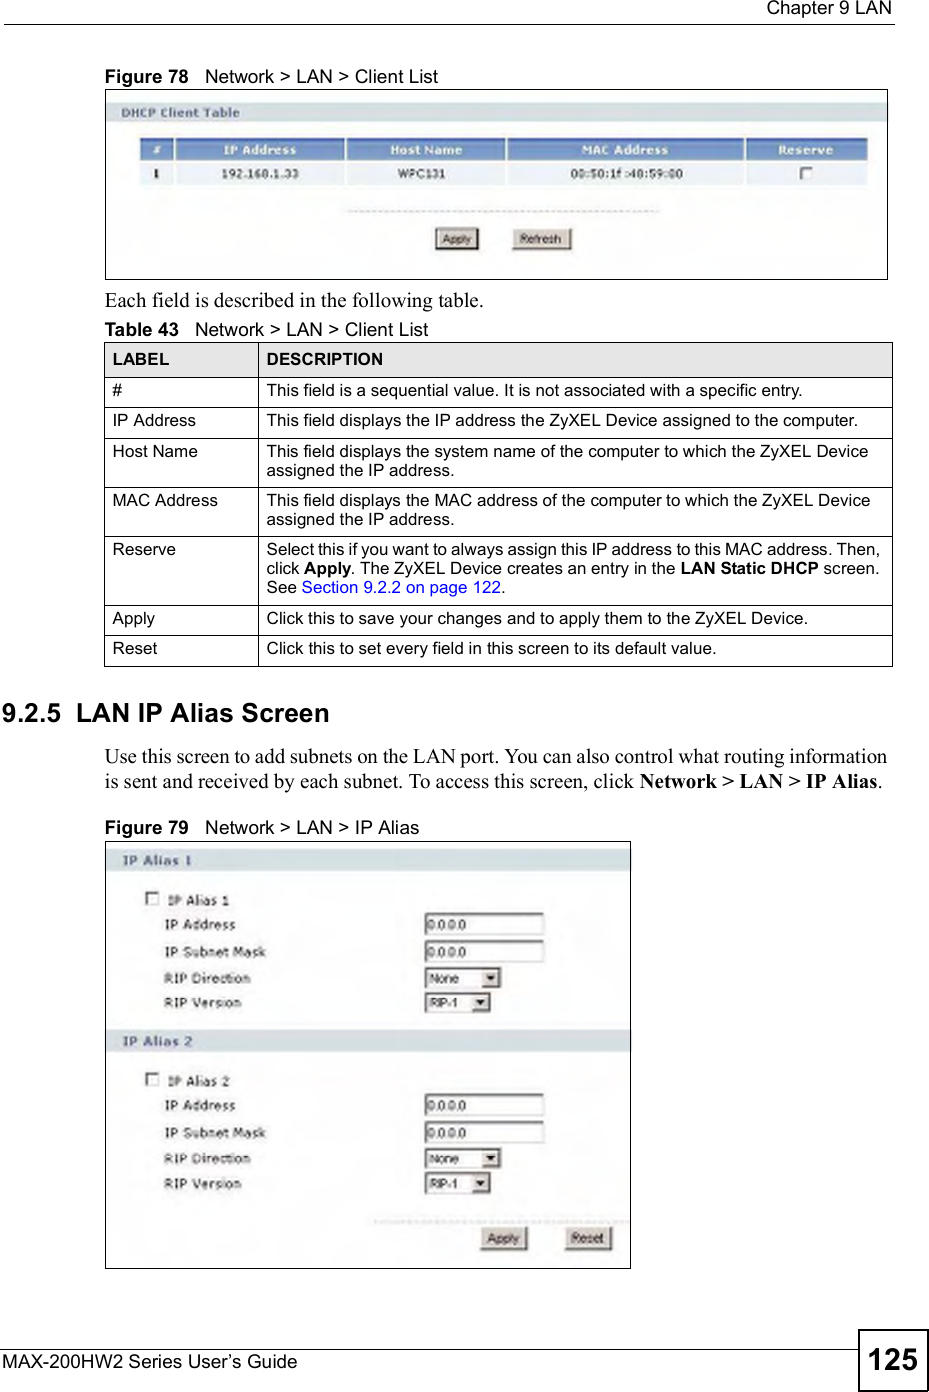  Chapter 9LANMAX-200HW2 Series User s Guide 125Figure 78   Network &gt; LAN &gt; Client ListEach field is described in the following table.9.2.5  LAN IP Alias ScreenUse this screen to add subnets on the LAN port. You can also control what routing information is sent and received by each subnet. To access this screen, click Network &gt; LAN &gt; IP Alias.Figure 79   Network &gt; LAN &gt; IP AliasTable 43   Network &gt; LAN &gt; Client ListLABEL DESCRIPTION#This field is a sequential value. It is not associated with a specific entry.IP Address This field displays the IP address the ZyXEL Device assigned to the computer.Host Name This field displays the system name of the computer to which the ZyXEL Device assigned the IP address.MAC Address This field displays the MAC address of the computer to which the ZyXEL Device assigned the IP address.Reserve Select this if you want to always assign this IP address to this MAC address. Then, click Apply. The ZyXEL Device creates an entry in the LAN Static DHCP screen. See Section 9.2.2 on page 122.Apply Click this to save your changes and to apply them to the ZyXEL Device.Reset Click this to set every field in this screen to its default value.